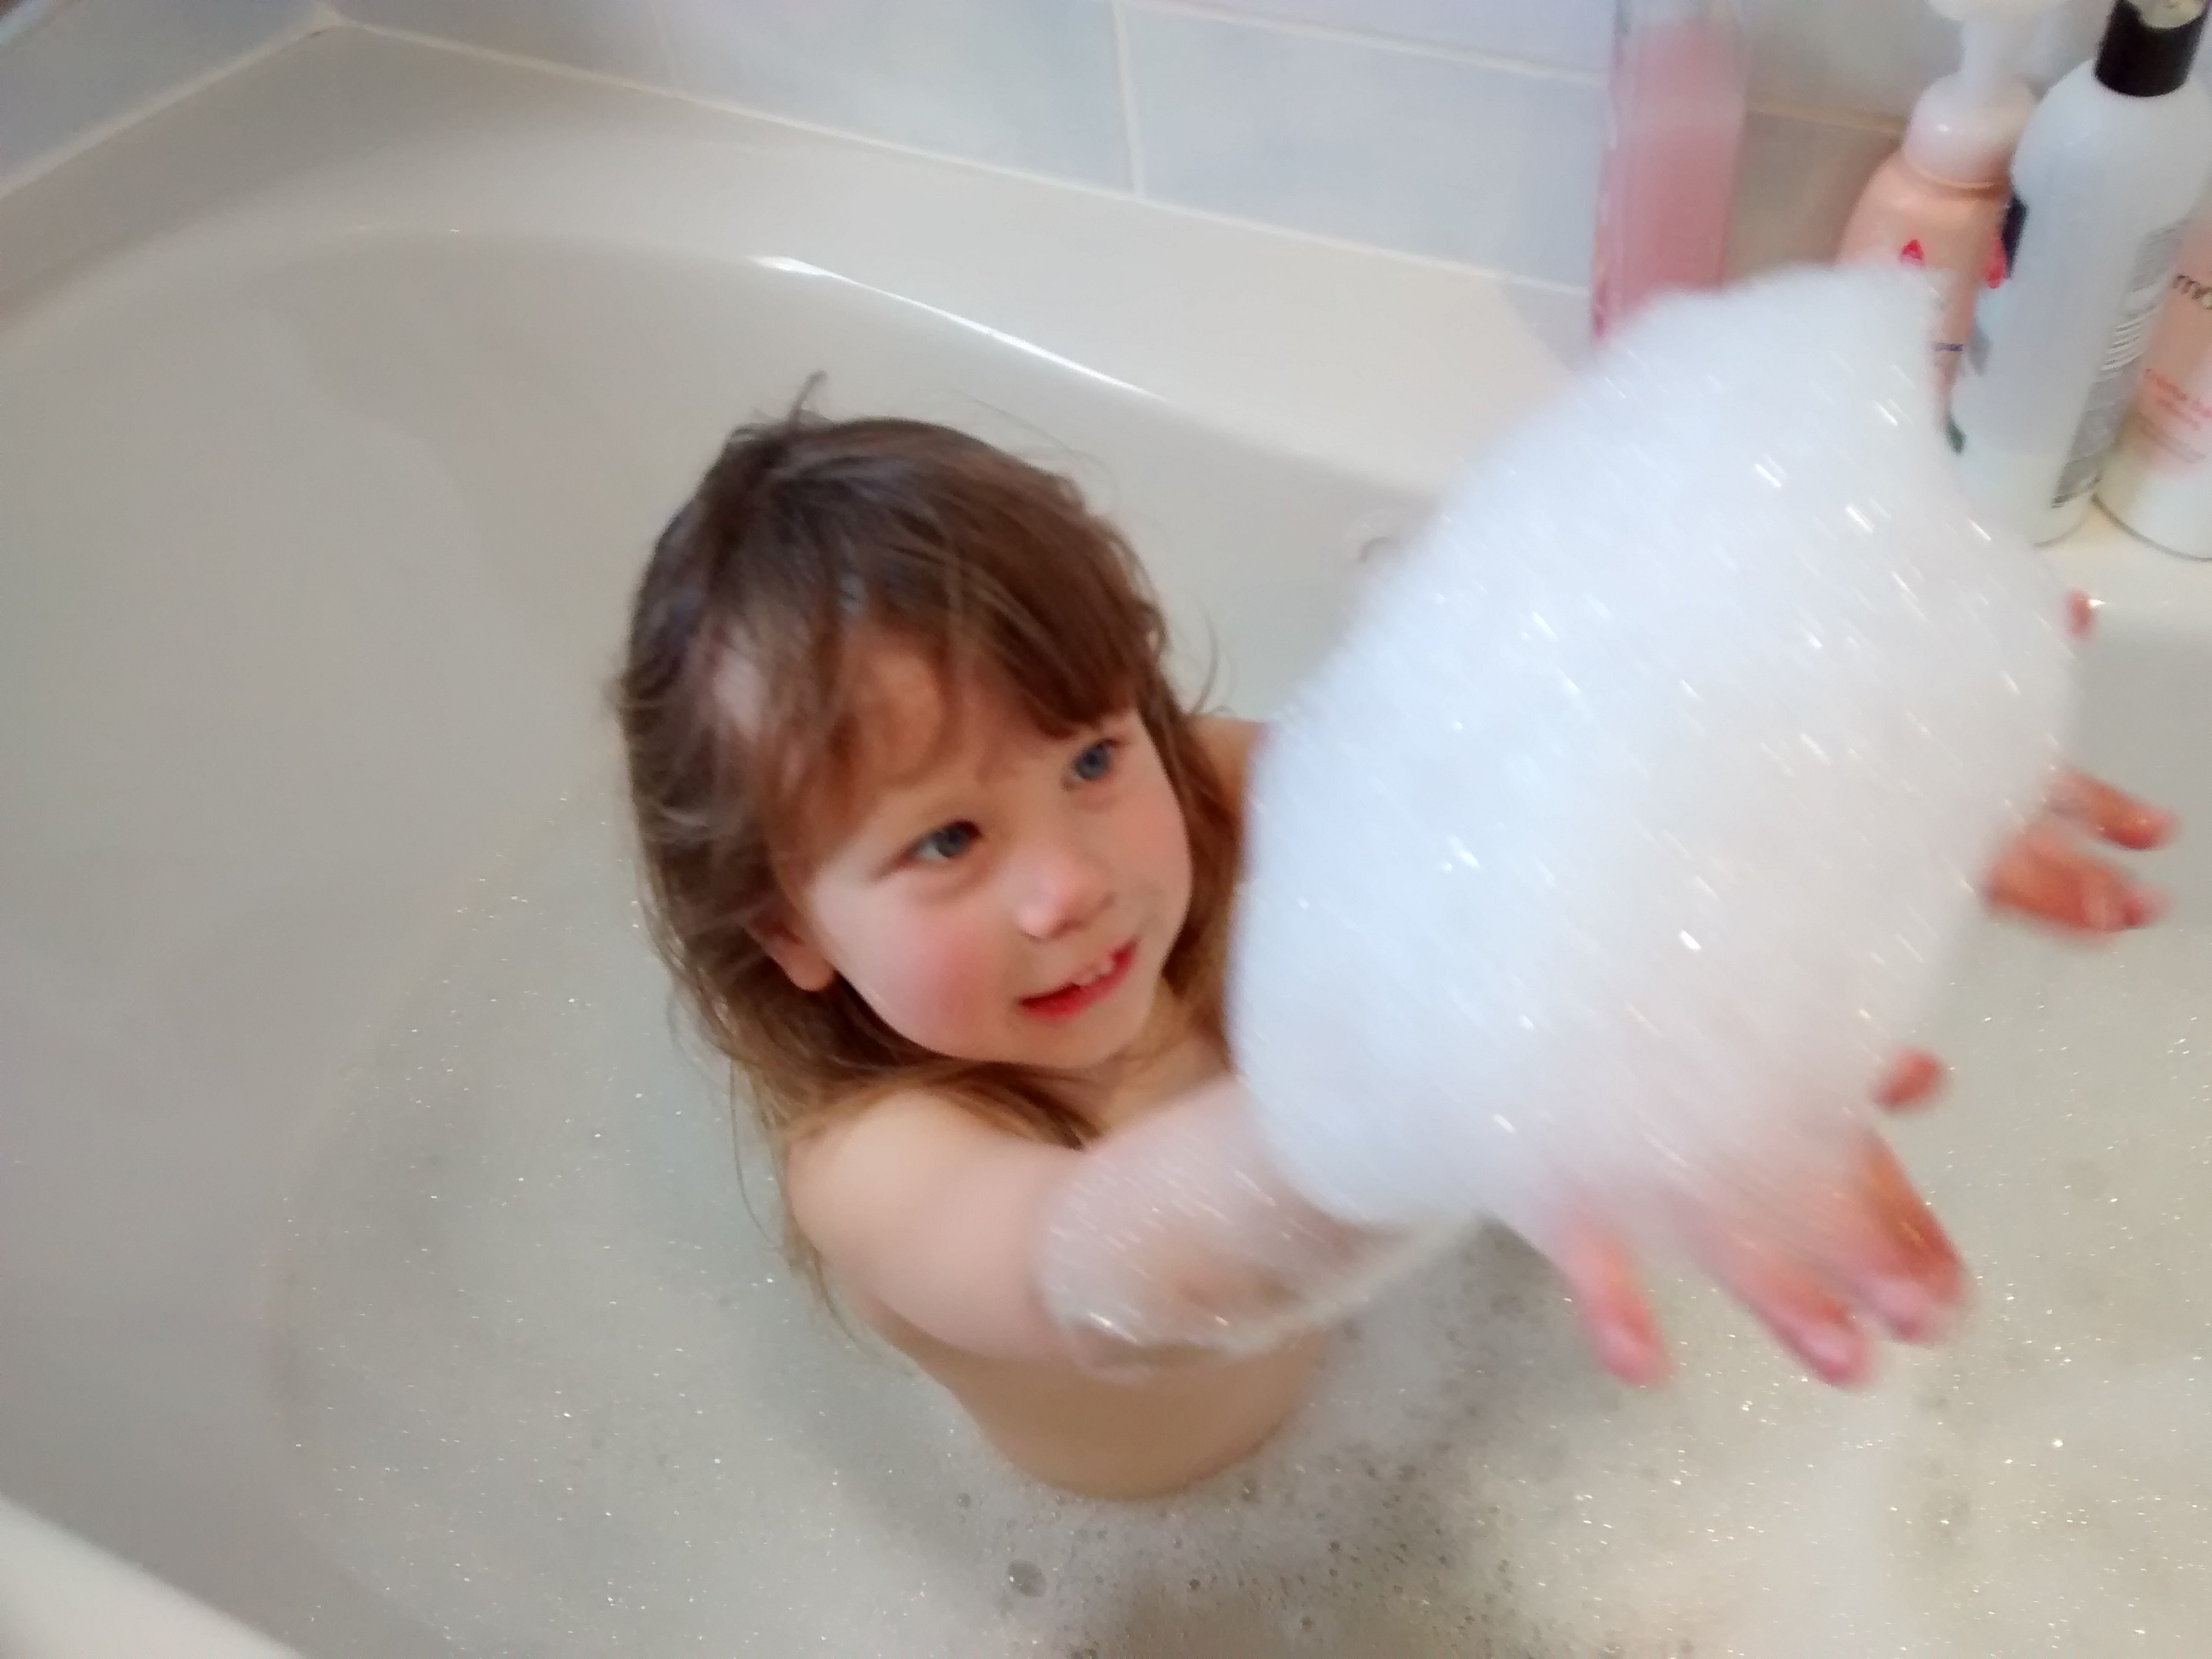 A child in a bathtub.^[[Image](https://www.flickr.com/photos/igcameron/26553679416) by [Ian Cameron](https://www.flickr.com/photos/igcameron/) is licensed under [CC BY 2.0](https://creativecommons.org/licenses/by/2.0/)]